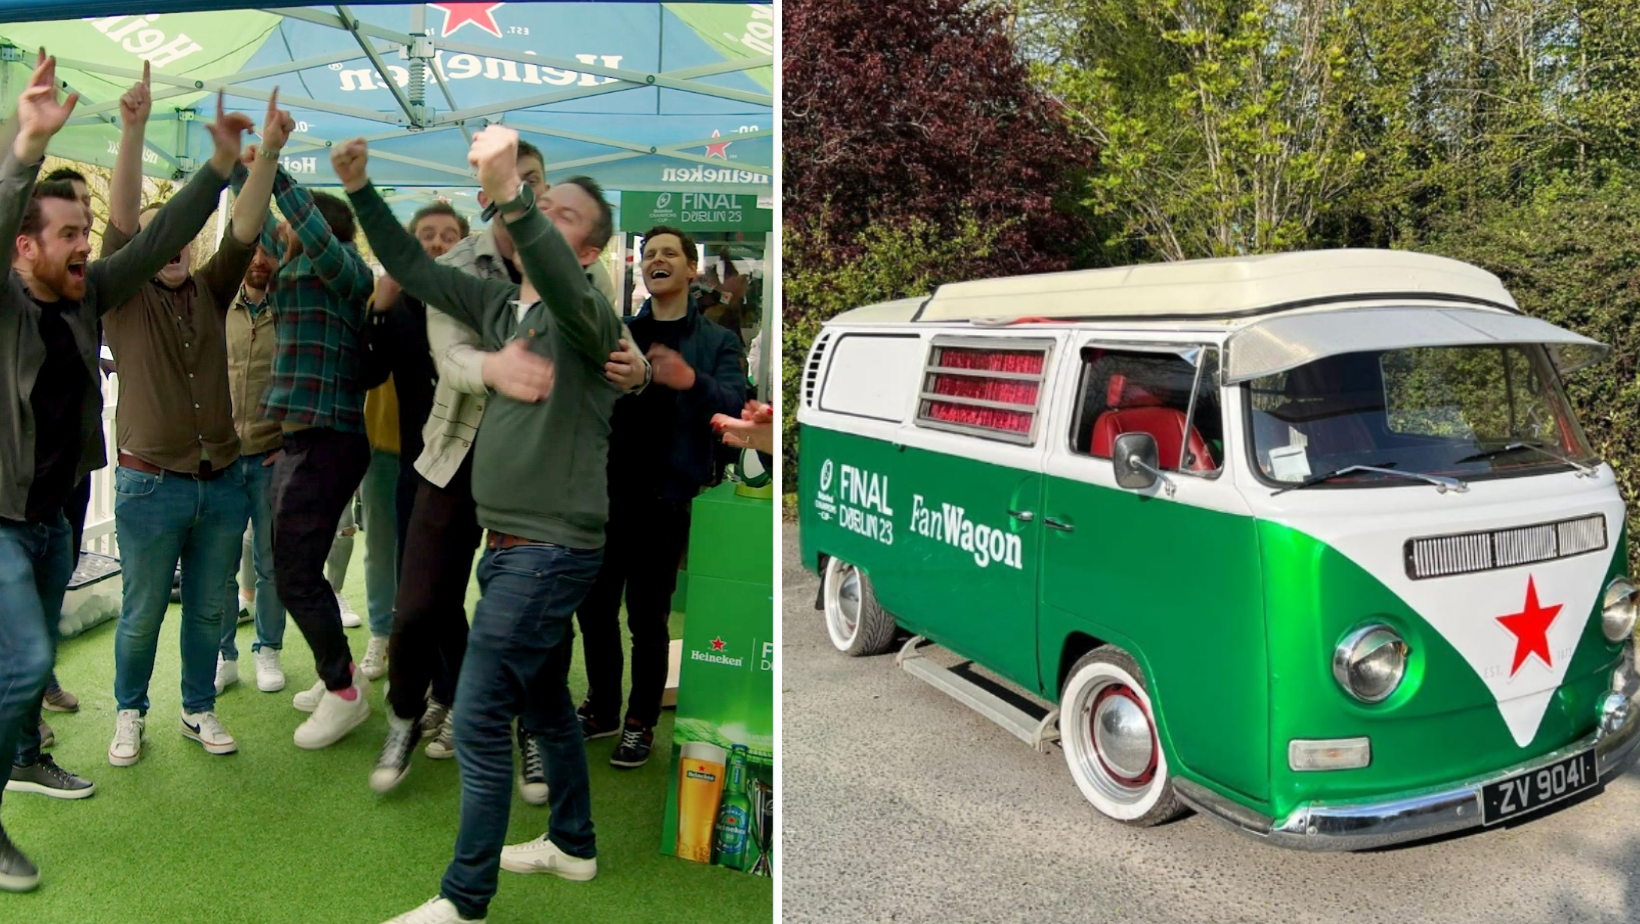 In Kilkenny this weekend? This one-of-a-kind campervan could be YOURS